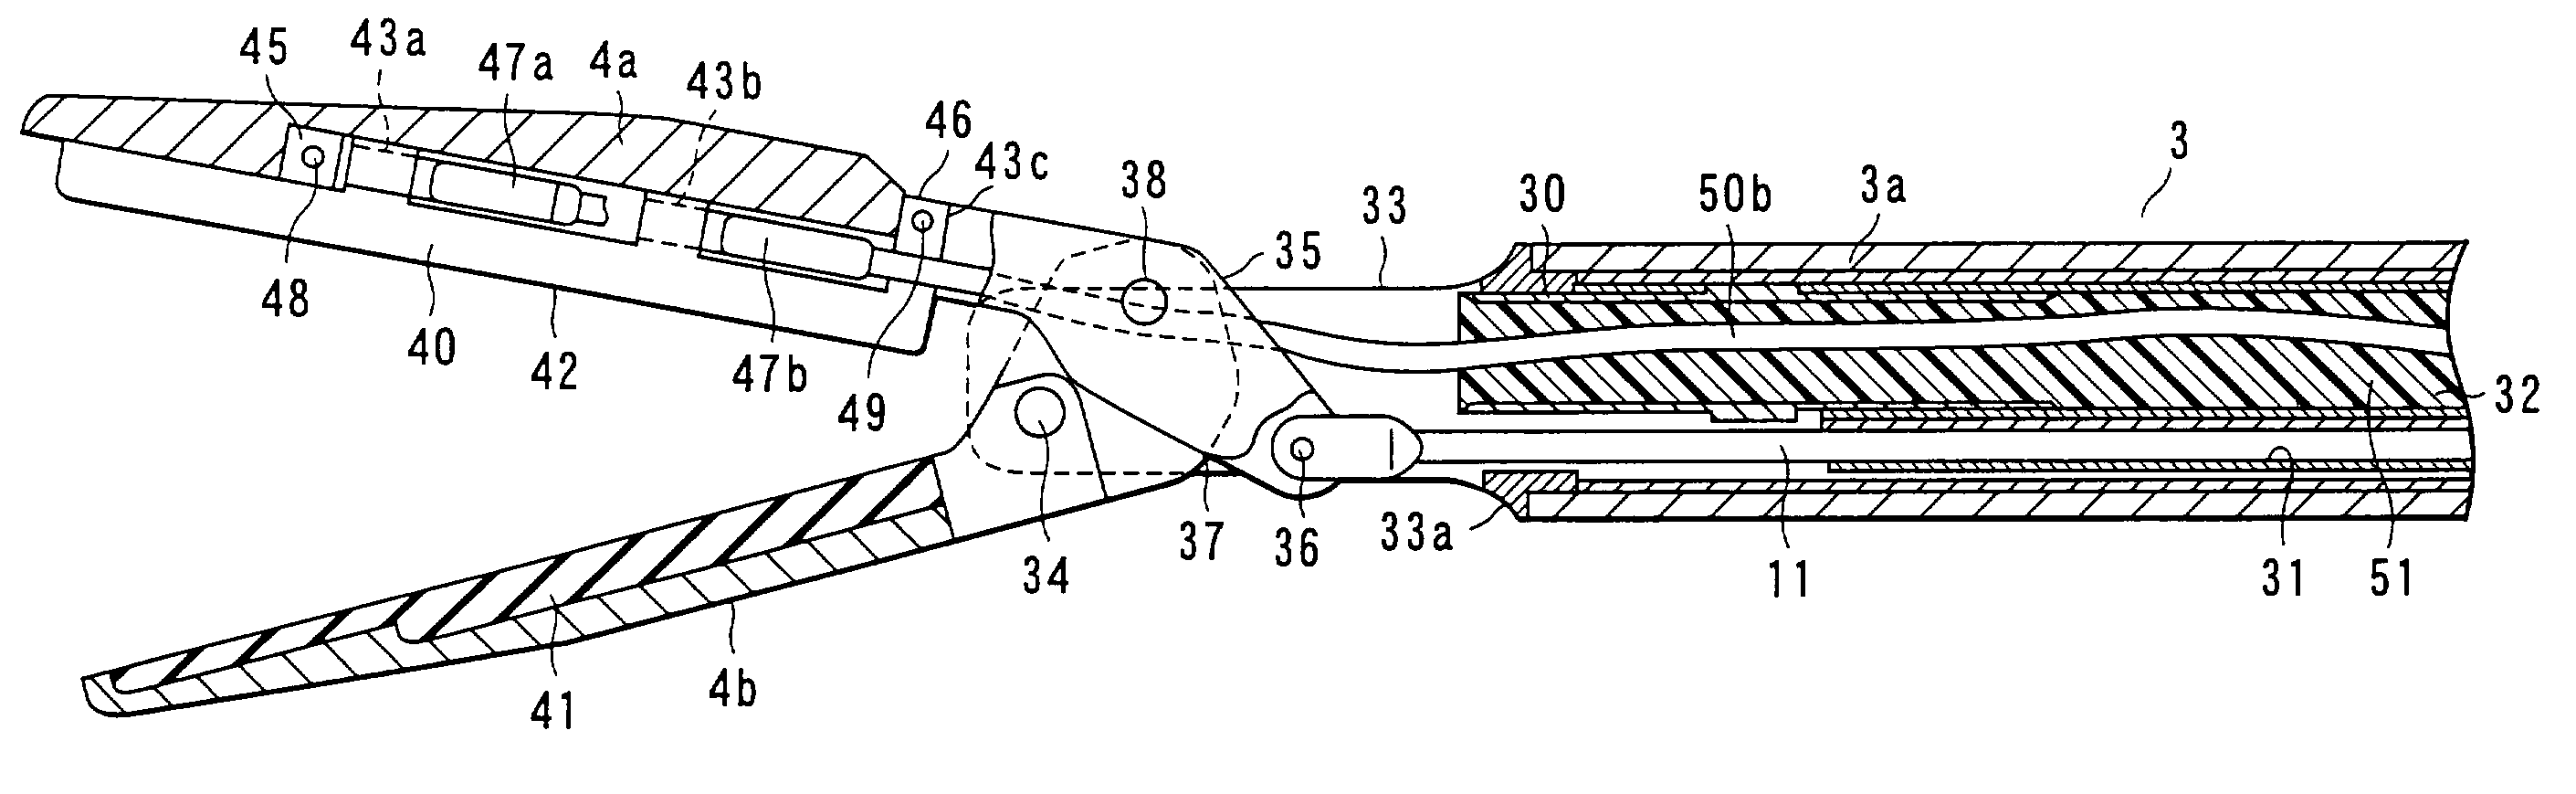 Treatment device for tissue from living tissues